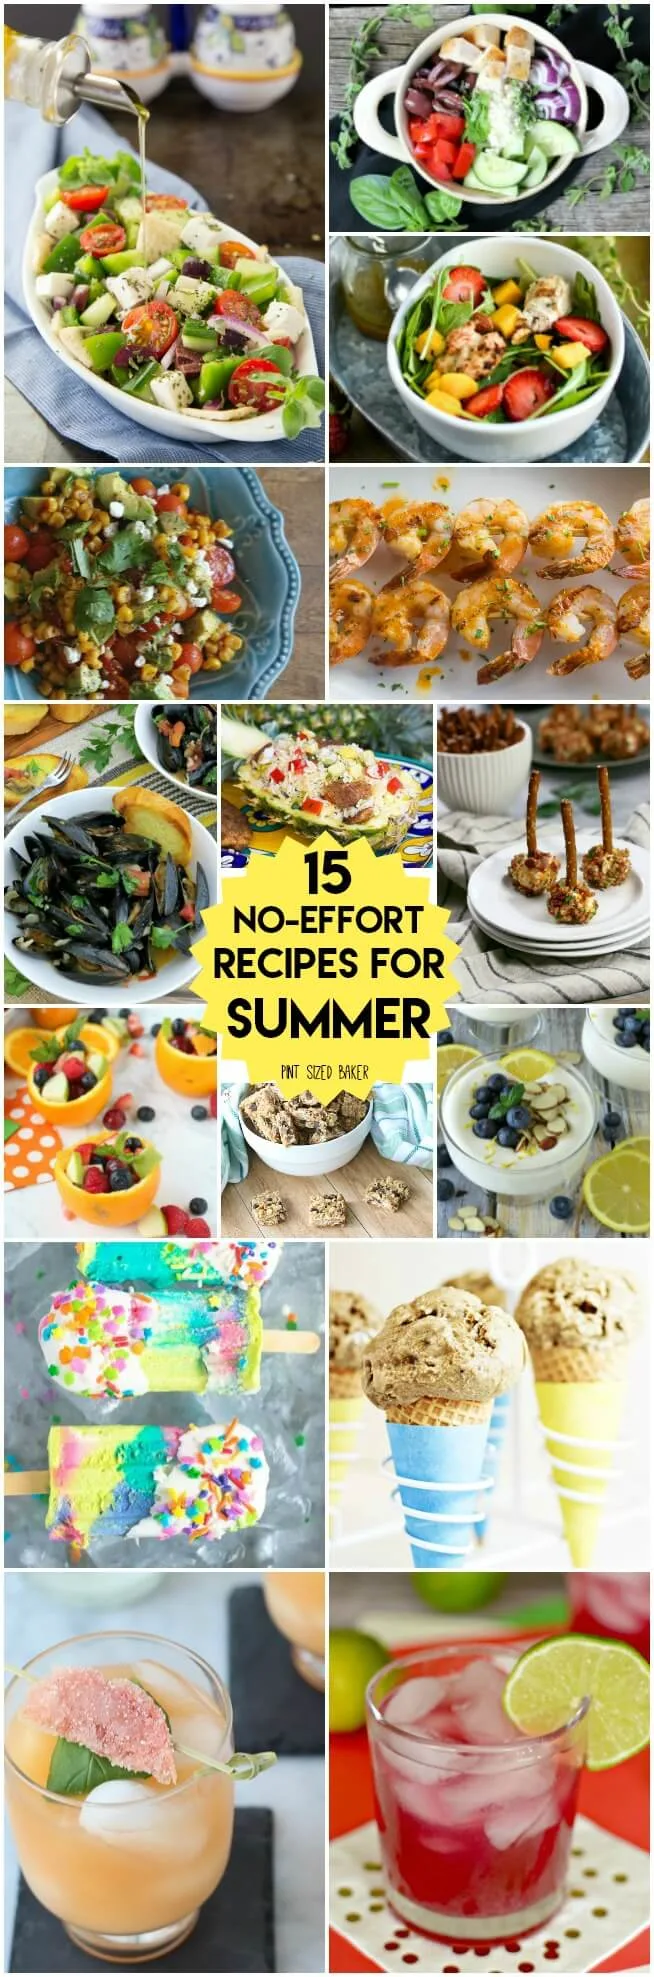 15 Perfect no effort recipes for summer. Load up on Salads, main dishes, desserts and drinks so that you can relax and enjoy the summer.